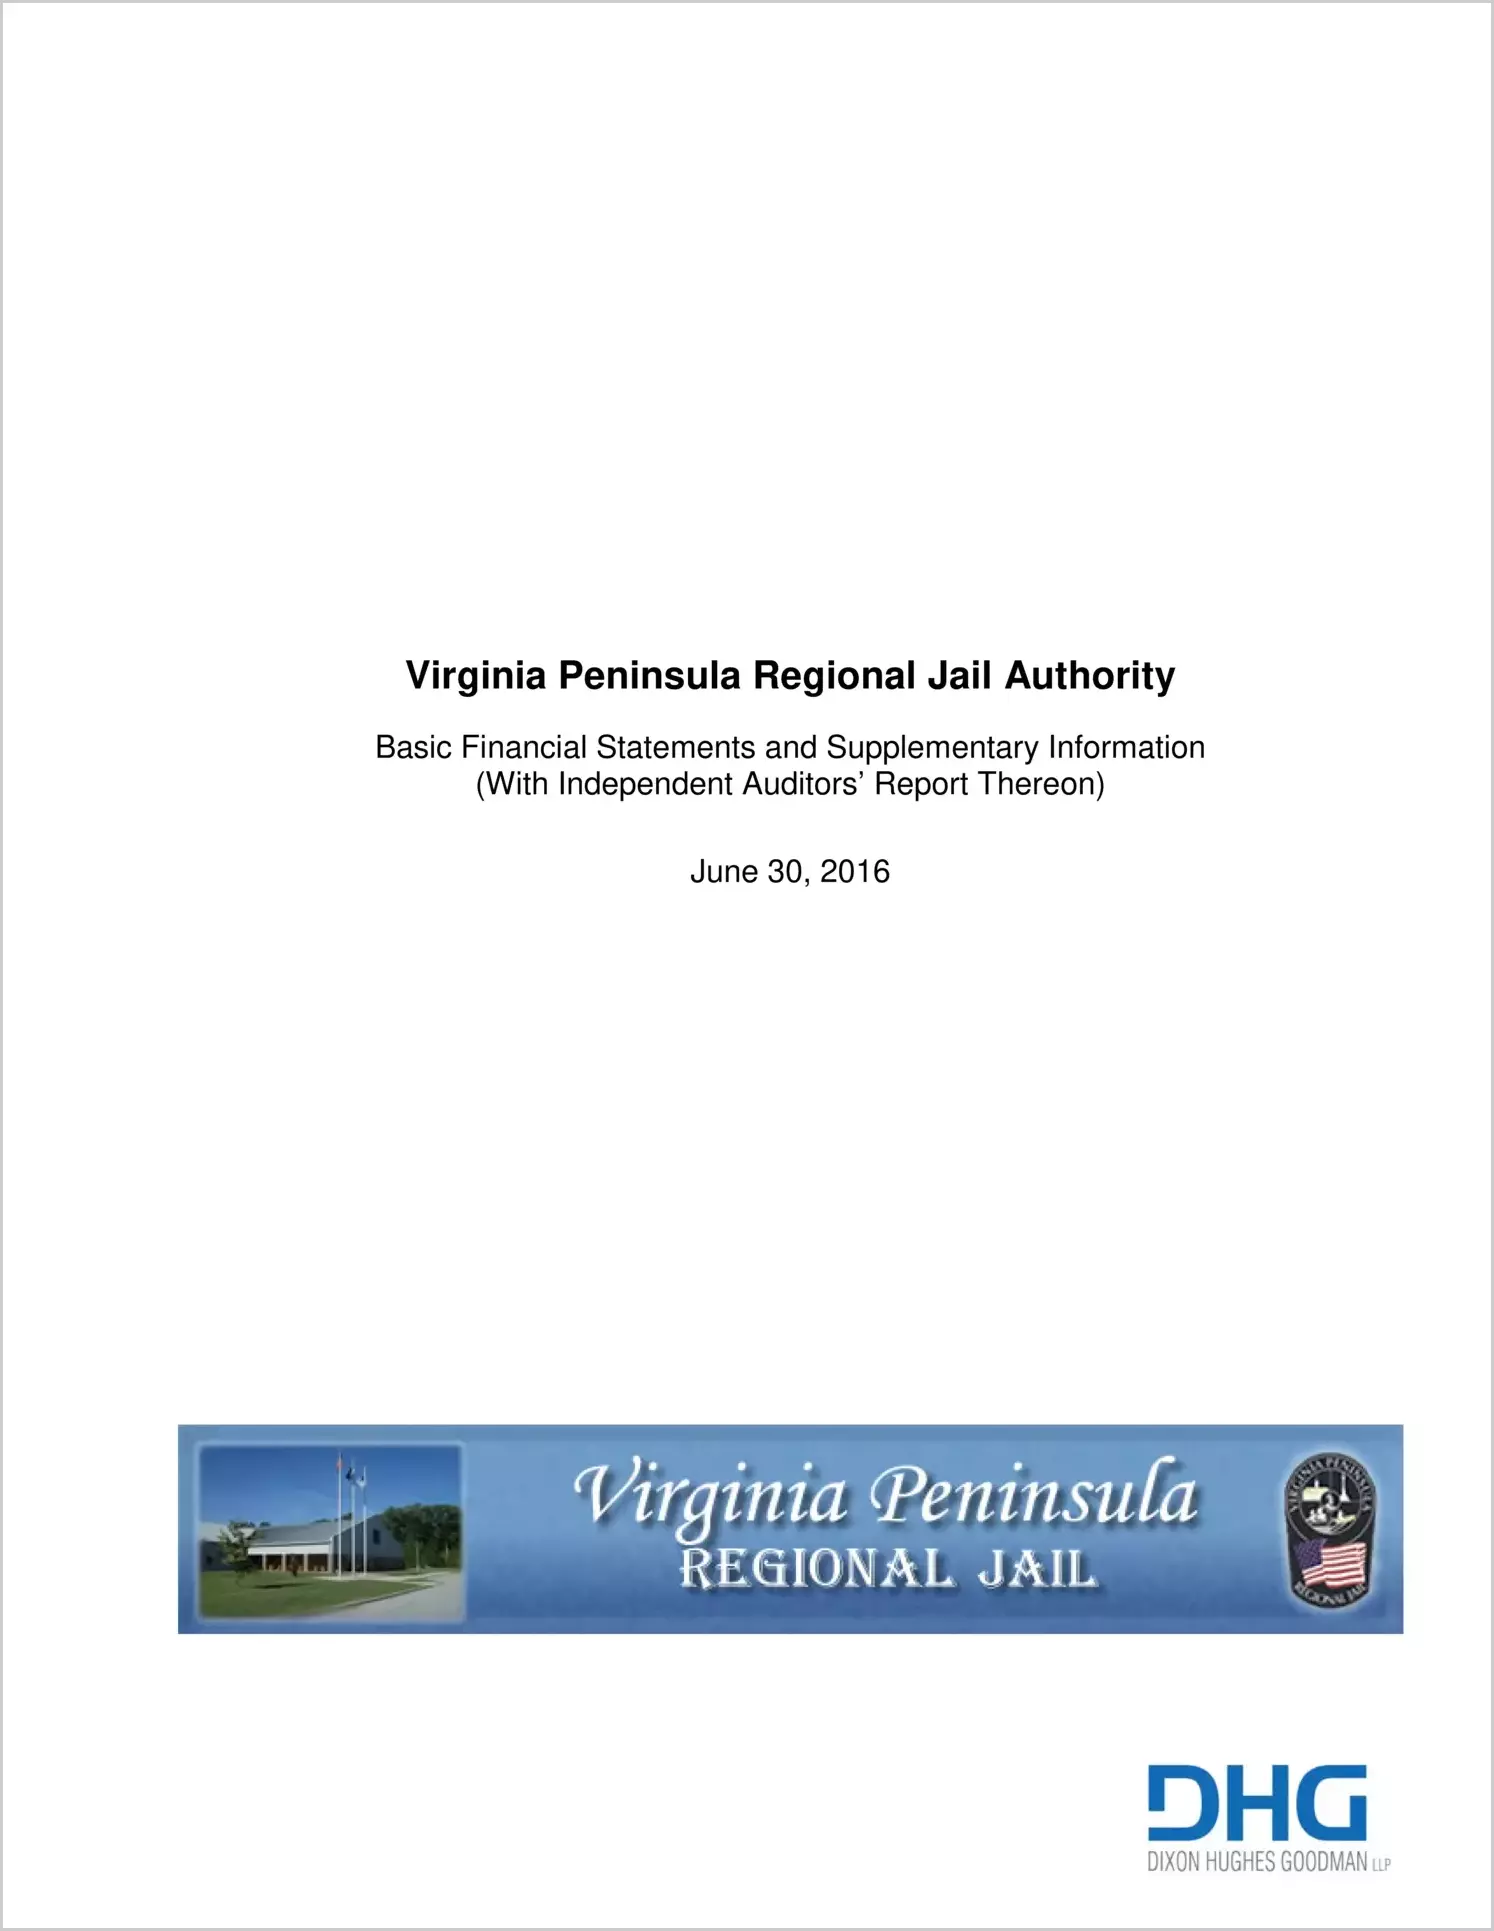 2016 ABC/Other Annual Financial Report  for Virginia Peninsula Regional Jail Authority